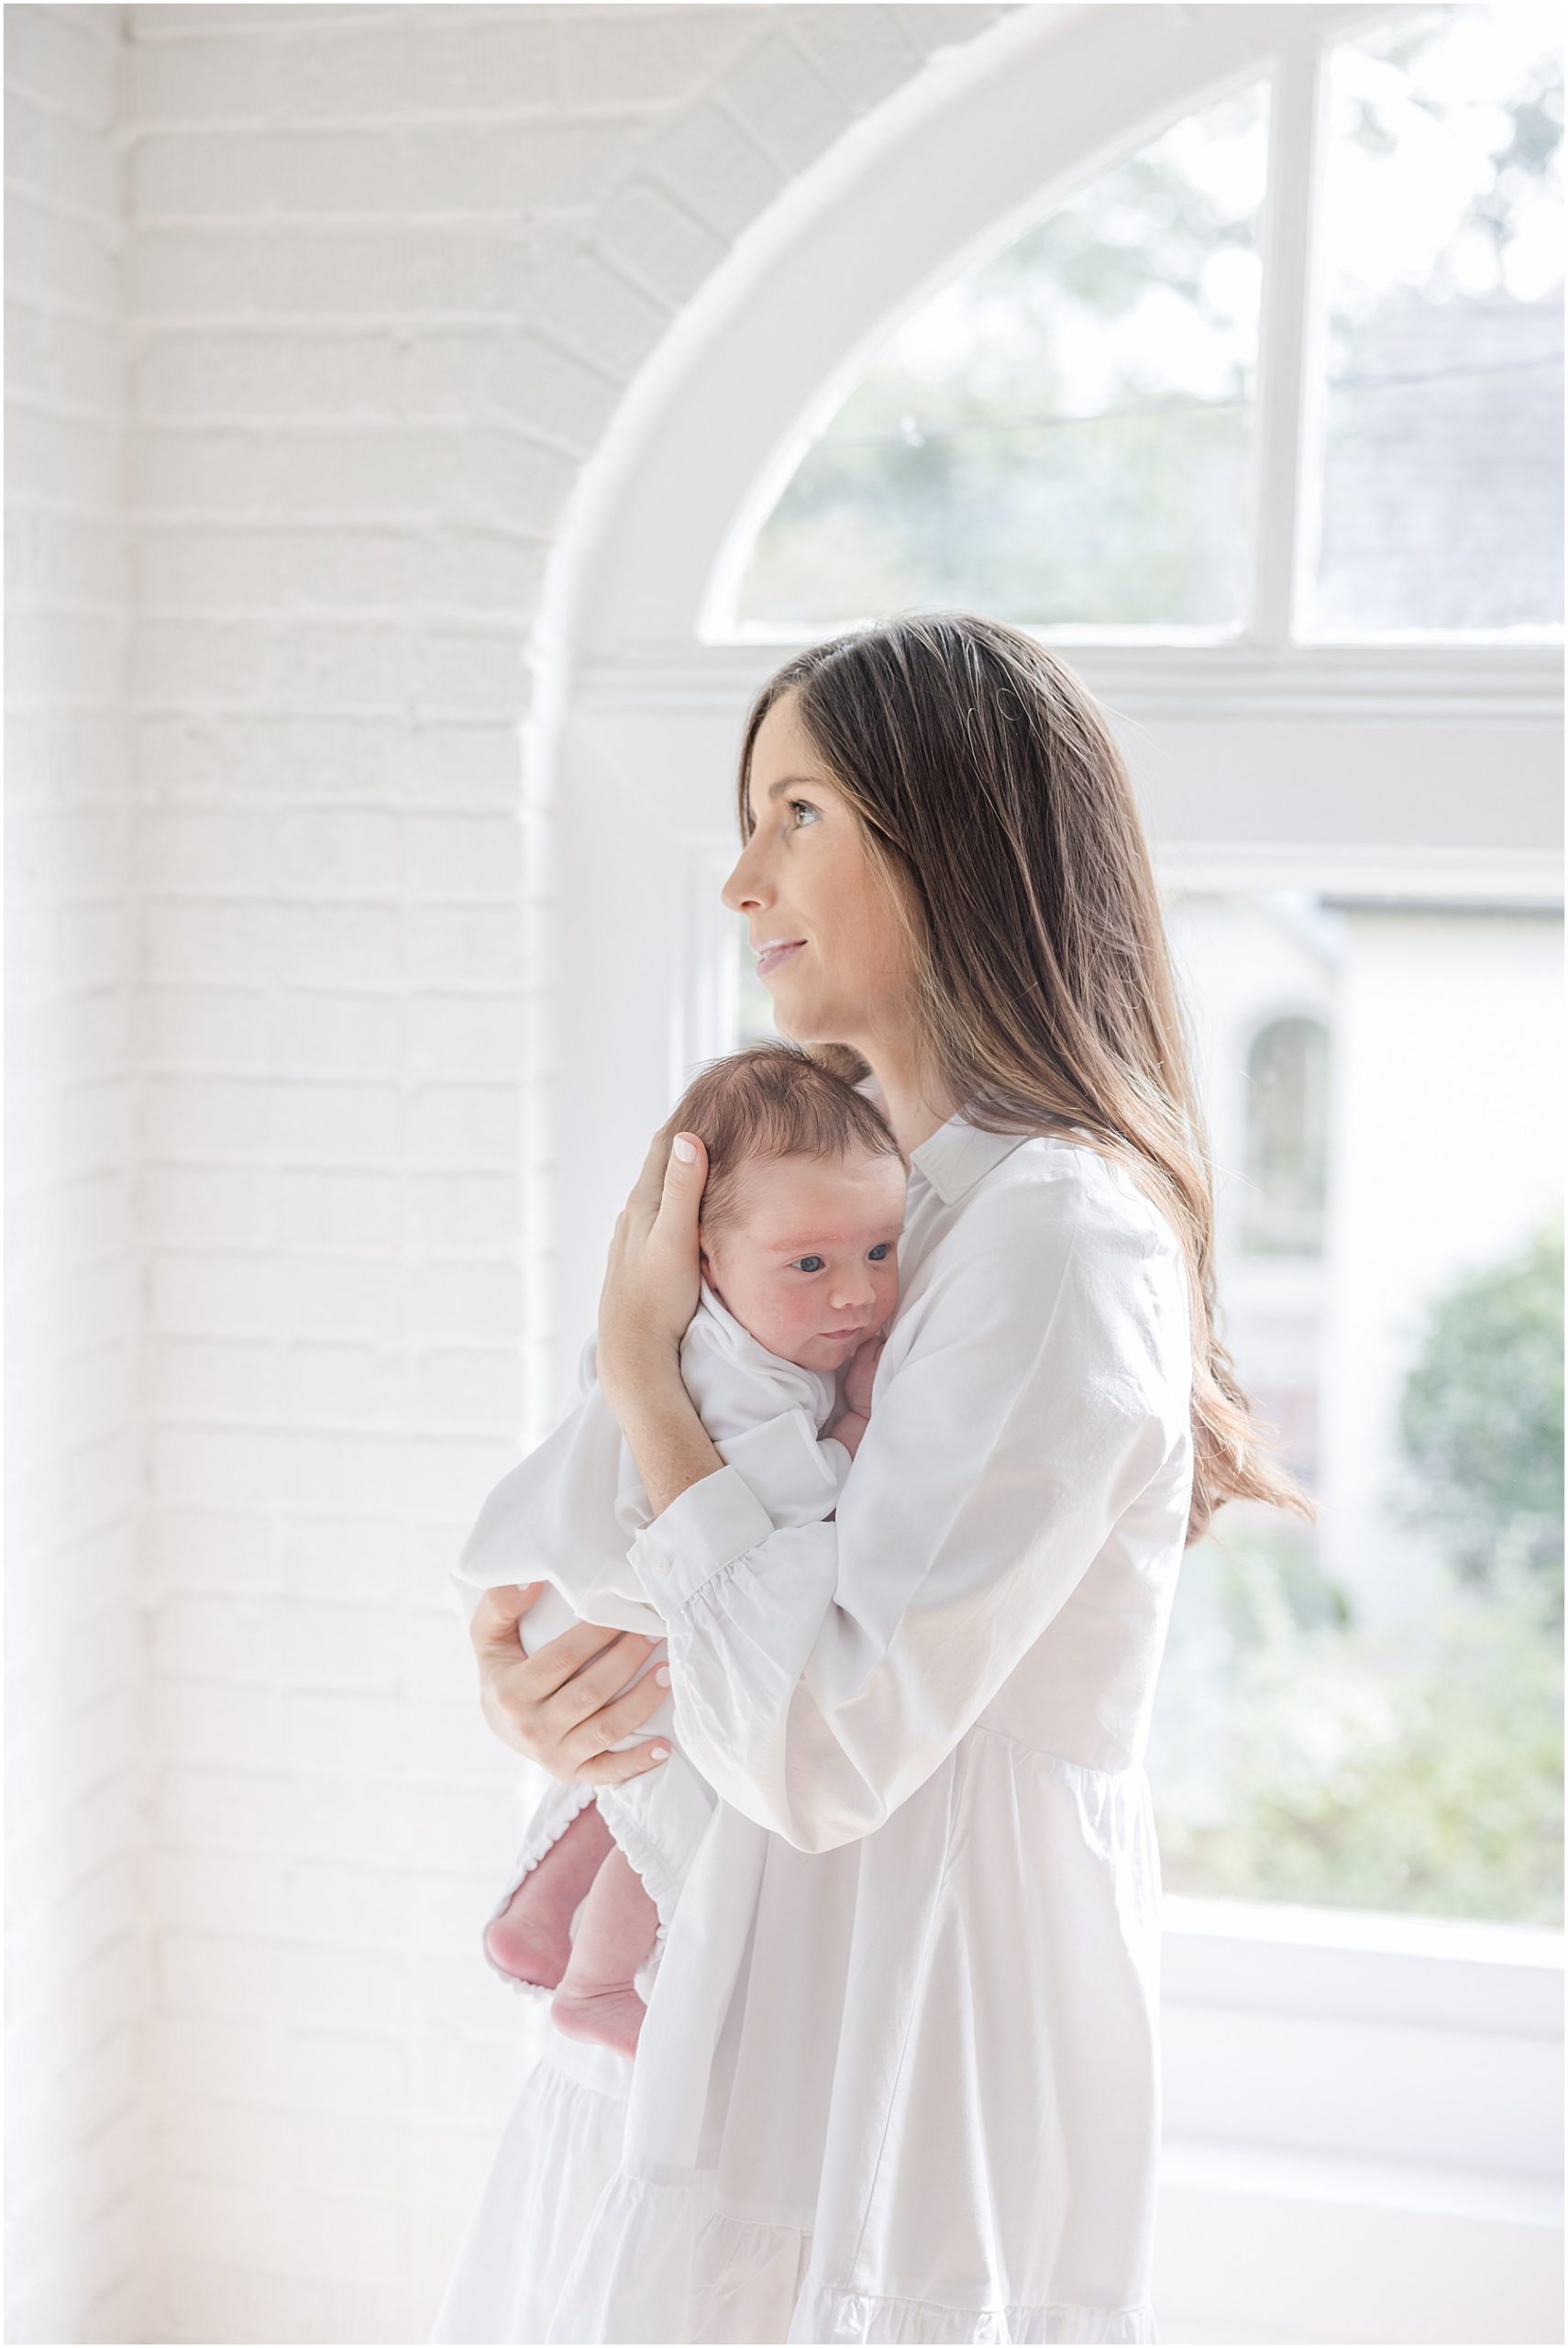 Young mother gazing out the window while cradling her newborn baby in this Greenville in home newborn photography session.